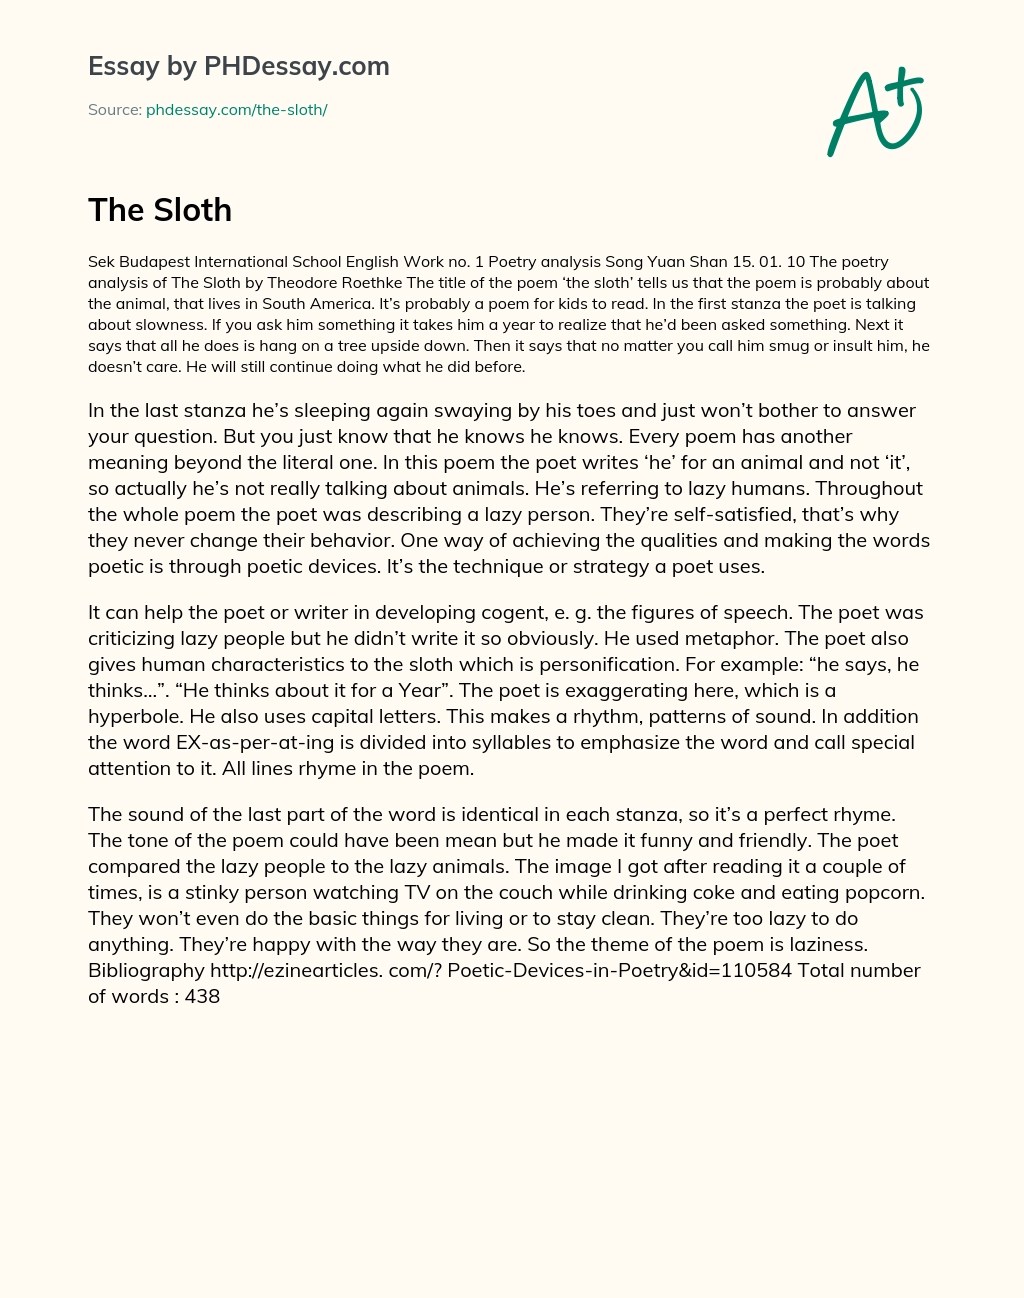 The Sloth by Theodore Roethke: A Poetic Critique of Laziness essay